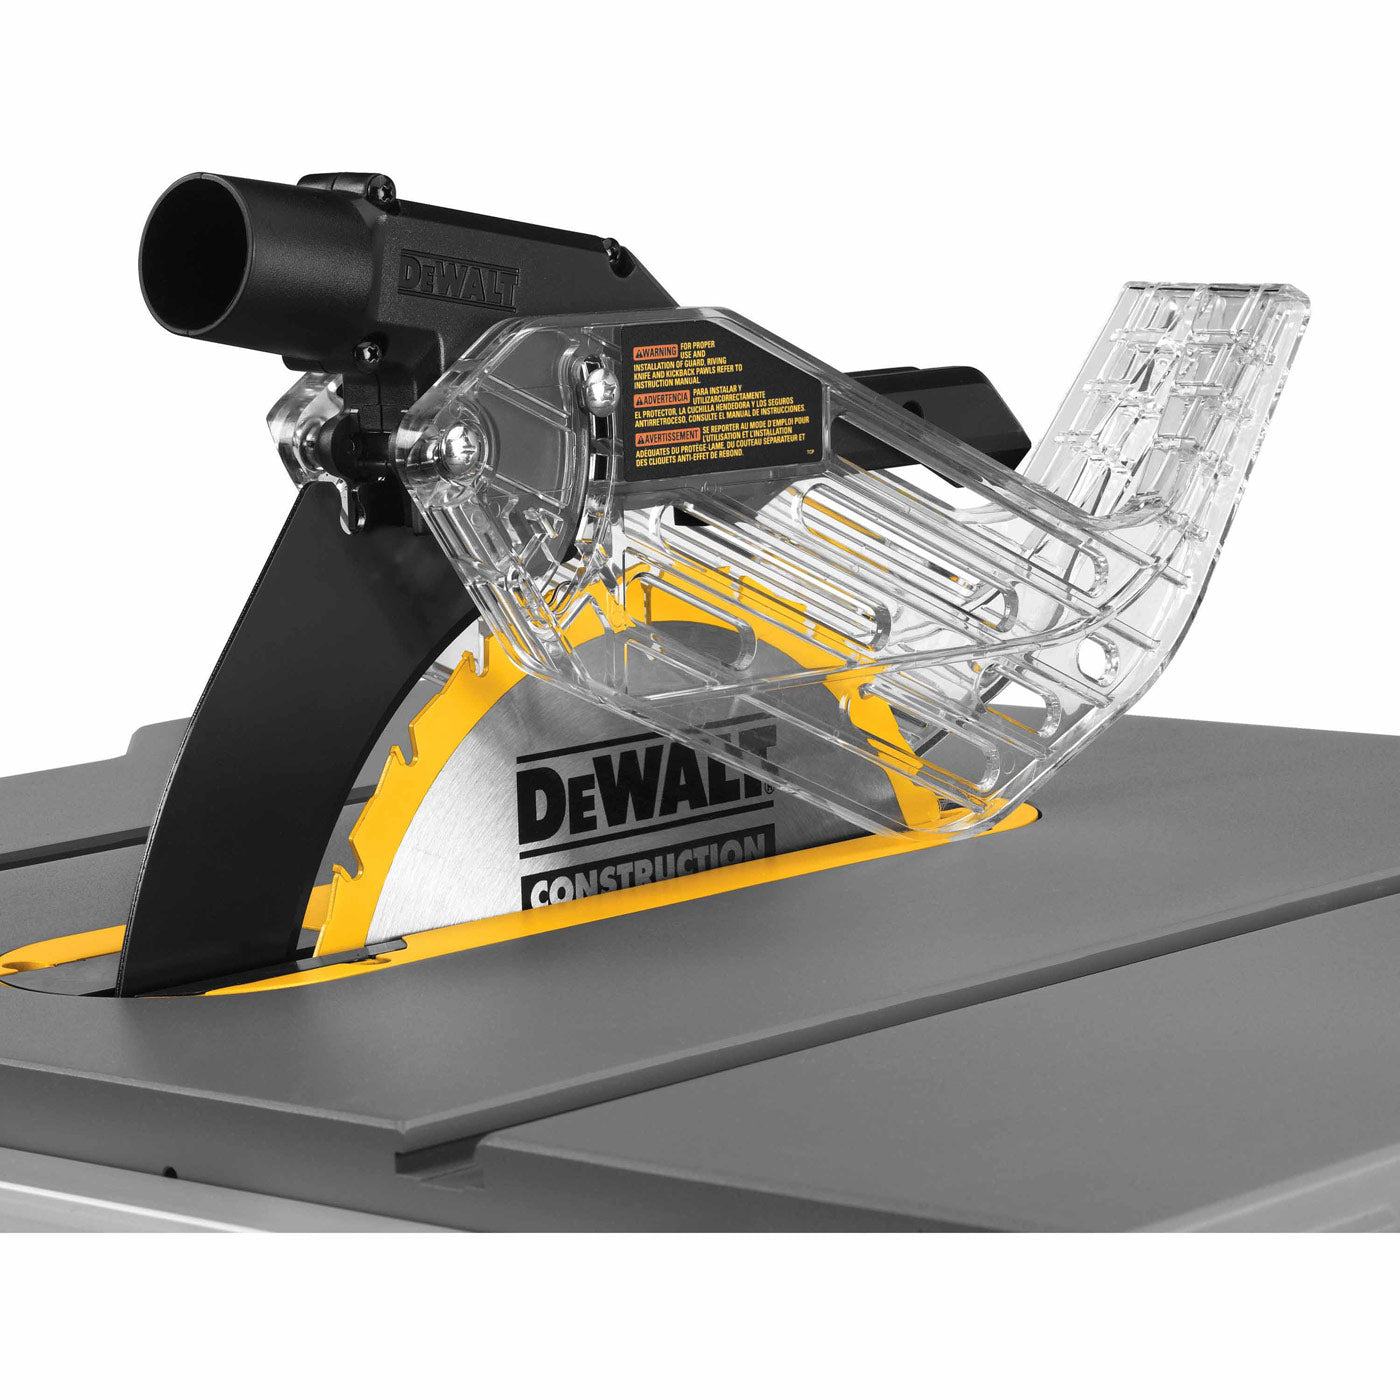 DeWalt DWE7491RS 10" Jobsite Table Saw 32 - 1/2" (82.5cm) Rip Capacity, and a Rolling Stand